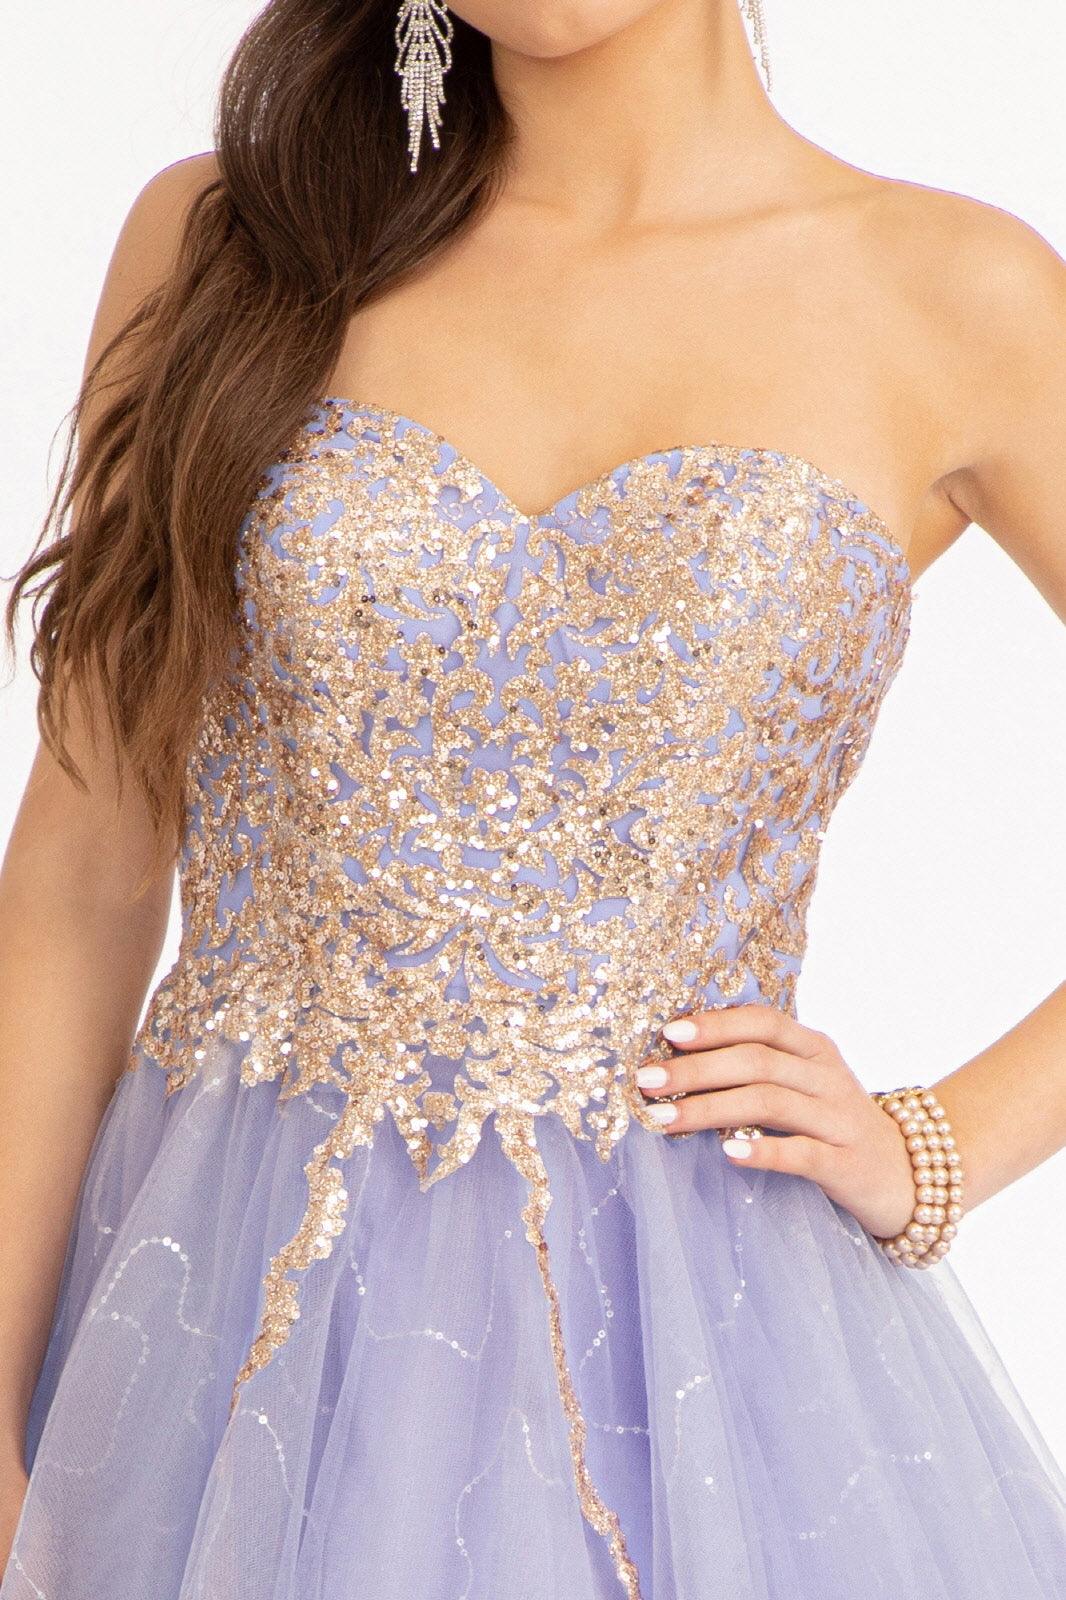 Strapless Homecoming Short Dress Sale - The Dress Outlet